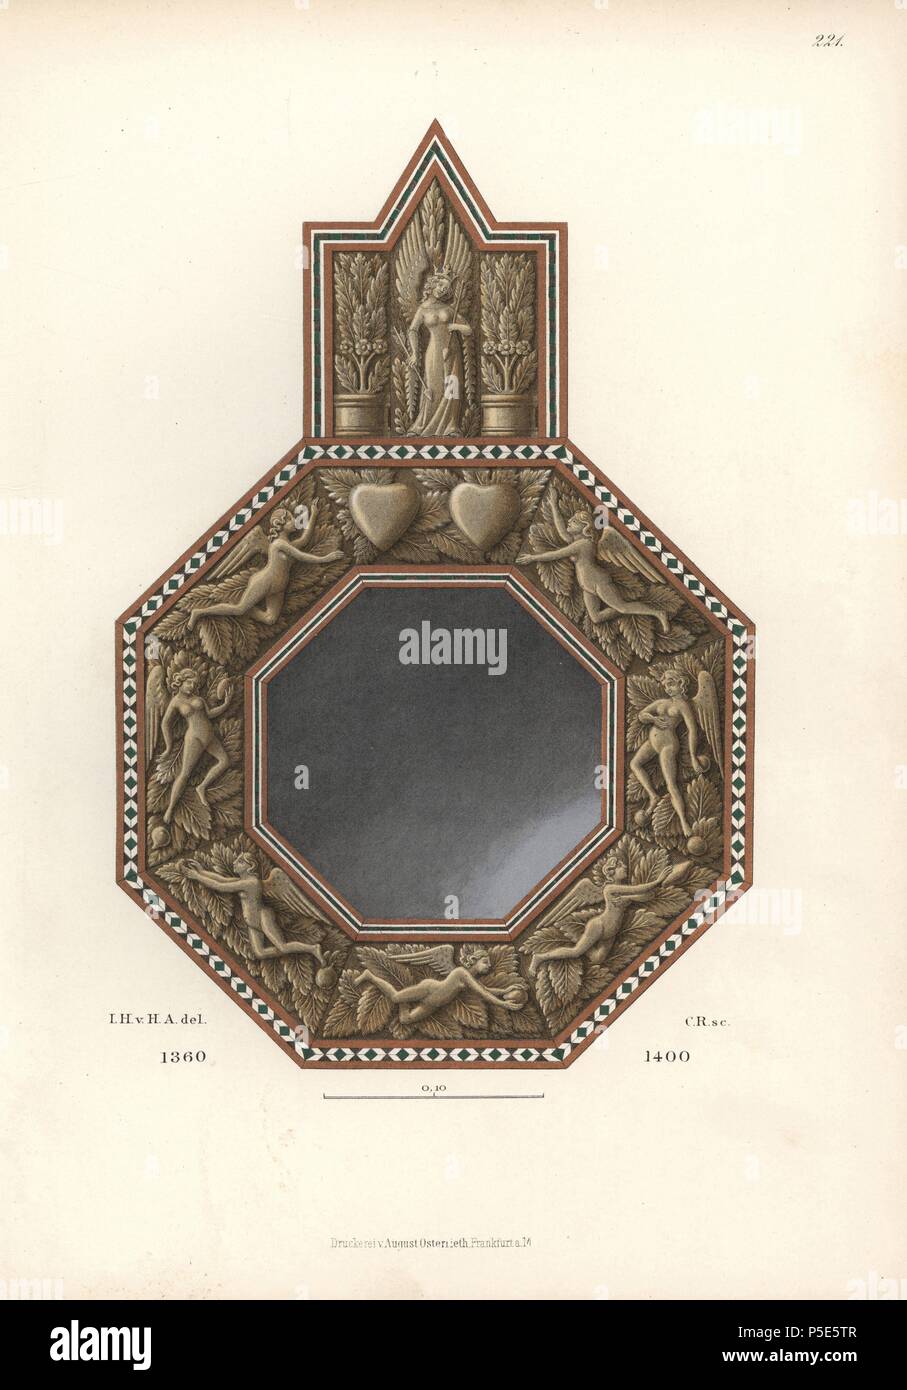 Metal mirror decorated with angels and hearts from the 14th century. Chromolithograph from Hefner-Alteneck's 'Costumes, Artworks and Appliances from the early Middle Ages to the end of the 18th Century,' Frankfurt, 1883. IIlustration drawn by Hefner-Alteneck, lithographed by C. Regnier, and published by Heinrich Keller. Dr. Jakob Heinrich von Hefner-Alteneck (1811-1903) was a German archeologist, art historian and illustrator. He was director of the Bavarian National Museum from 1868 until 1886. Stock Photo